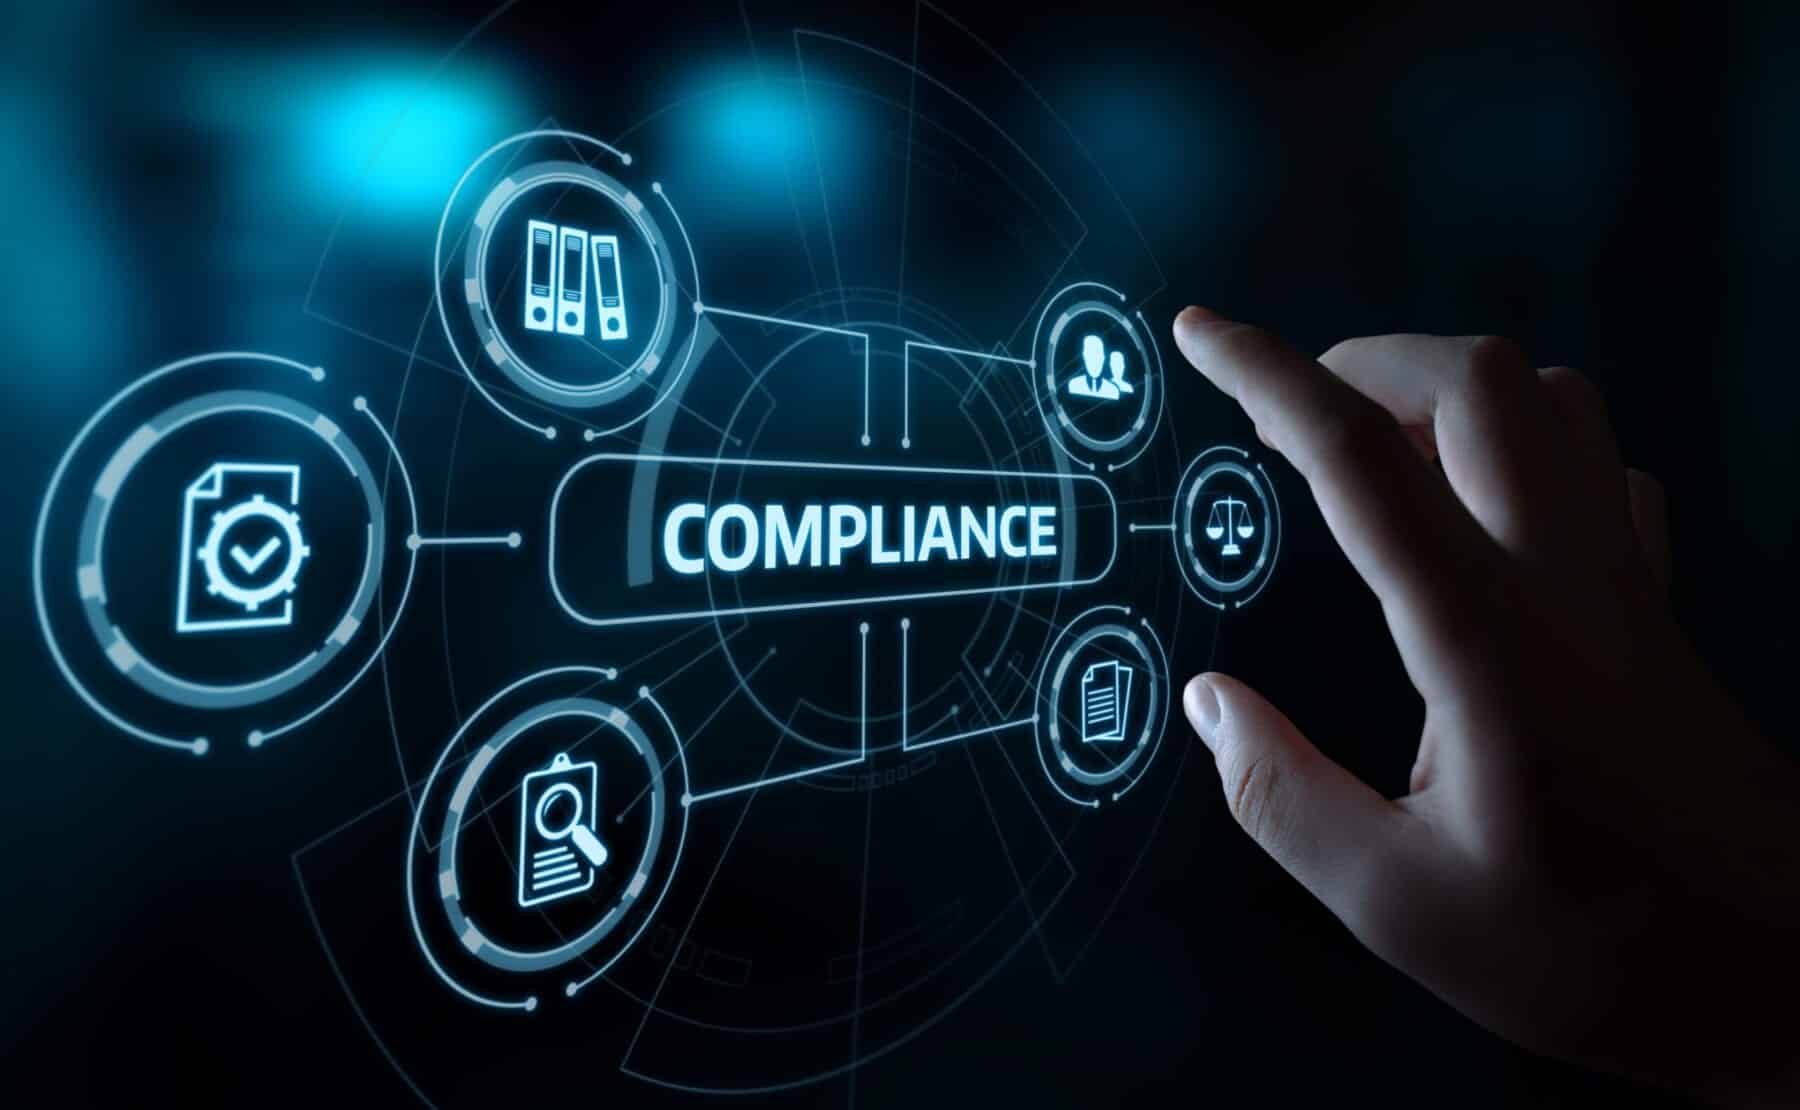 7 Basic Steps to NIST Compliance